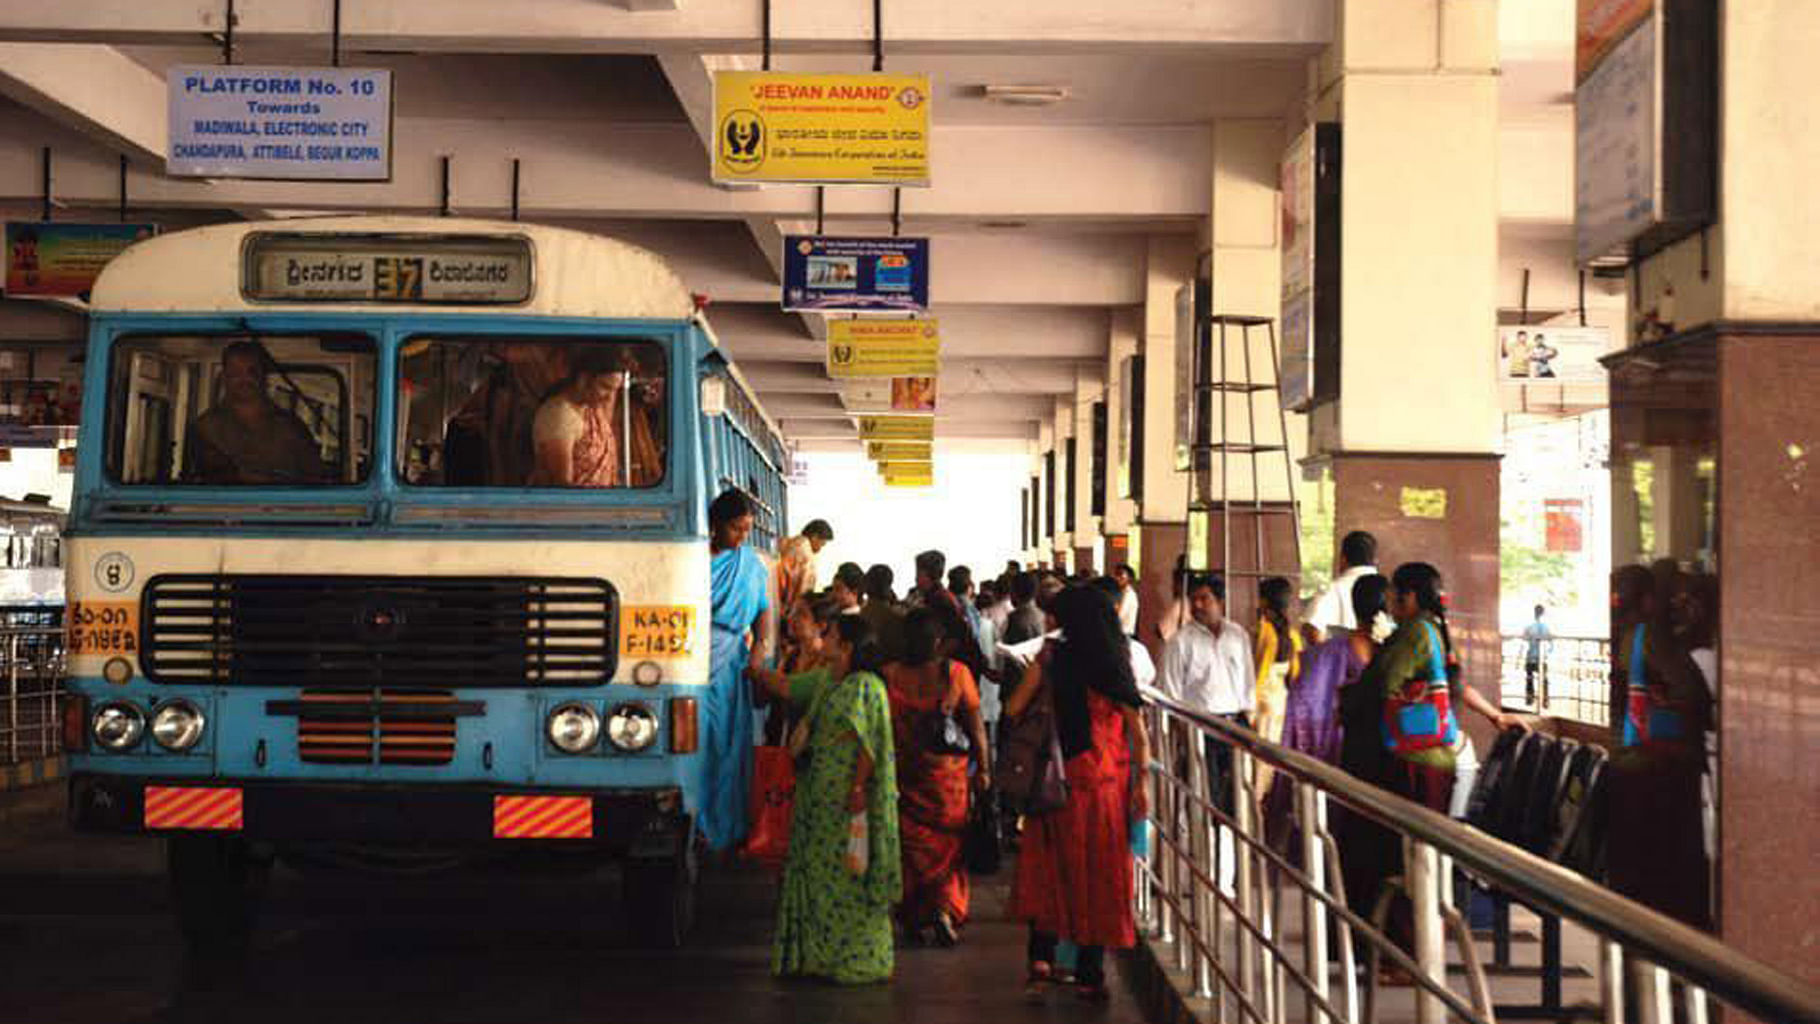 A BMTC/KSRTC bus. Photo used for representation. (Photo: BMTC/KSRTC’s <a href="https://www.facebook.com/BANG.BANGALOREANS/photos/a.265733113531585.49703.207325742705656/287847094653520/?type=3&amp;theater">Facebook</a> Page)